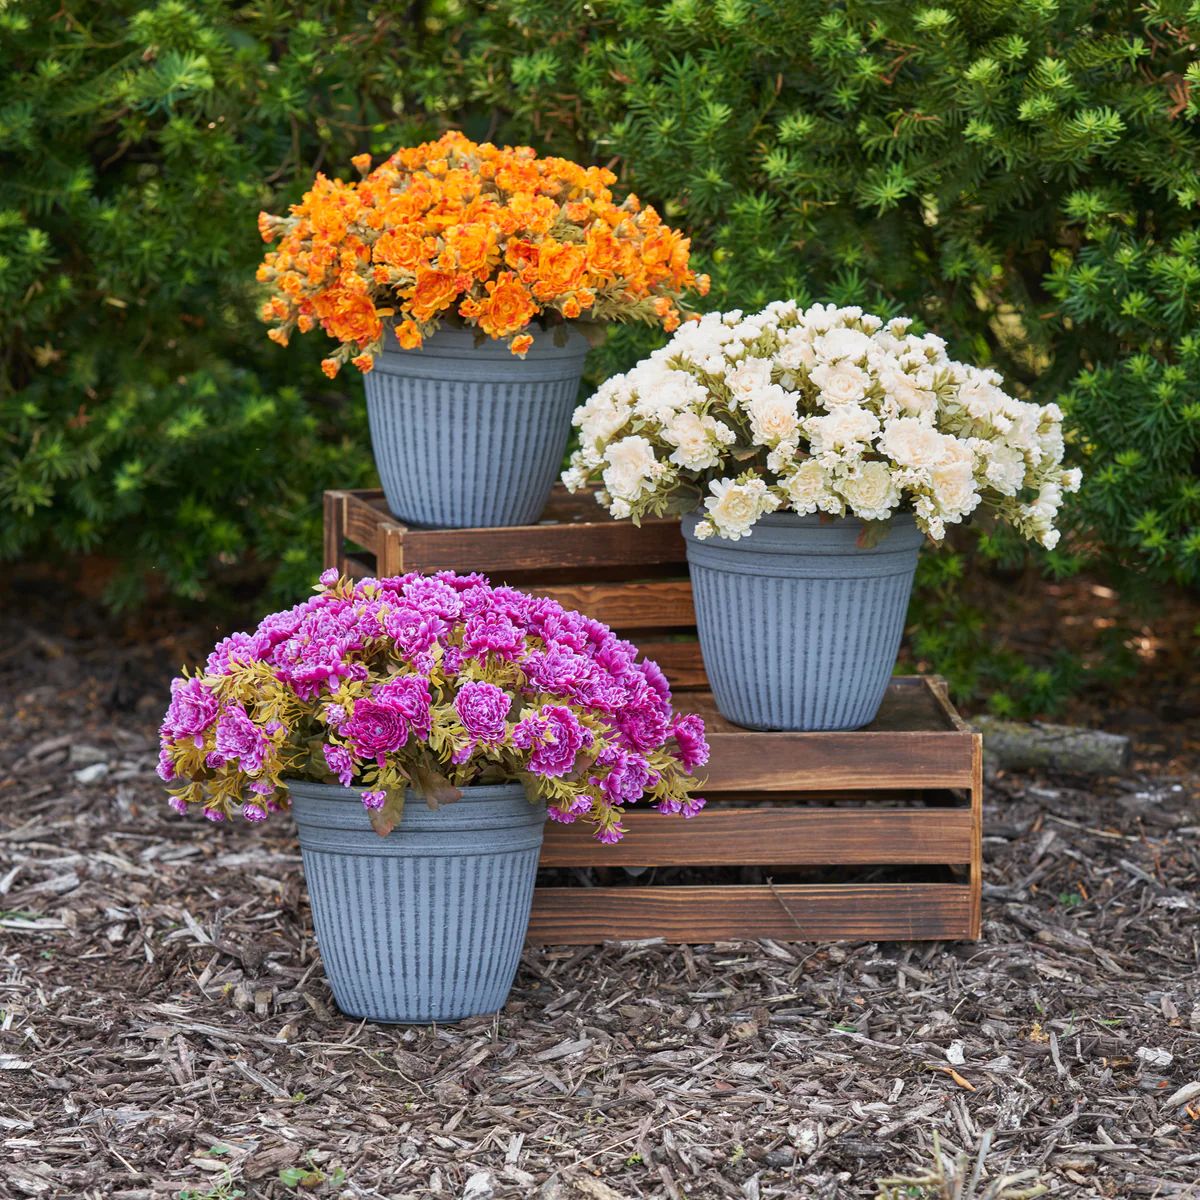 Faux Fall Mum Bush Outdoor Fall Arrangement Urn Filler - Available in 3 Colors | Darby Creek Trading